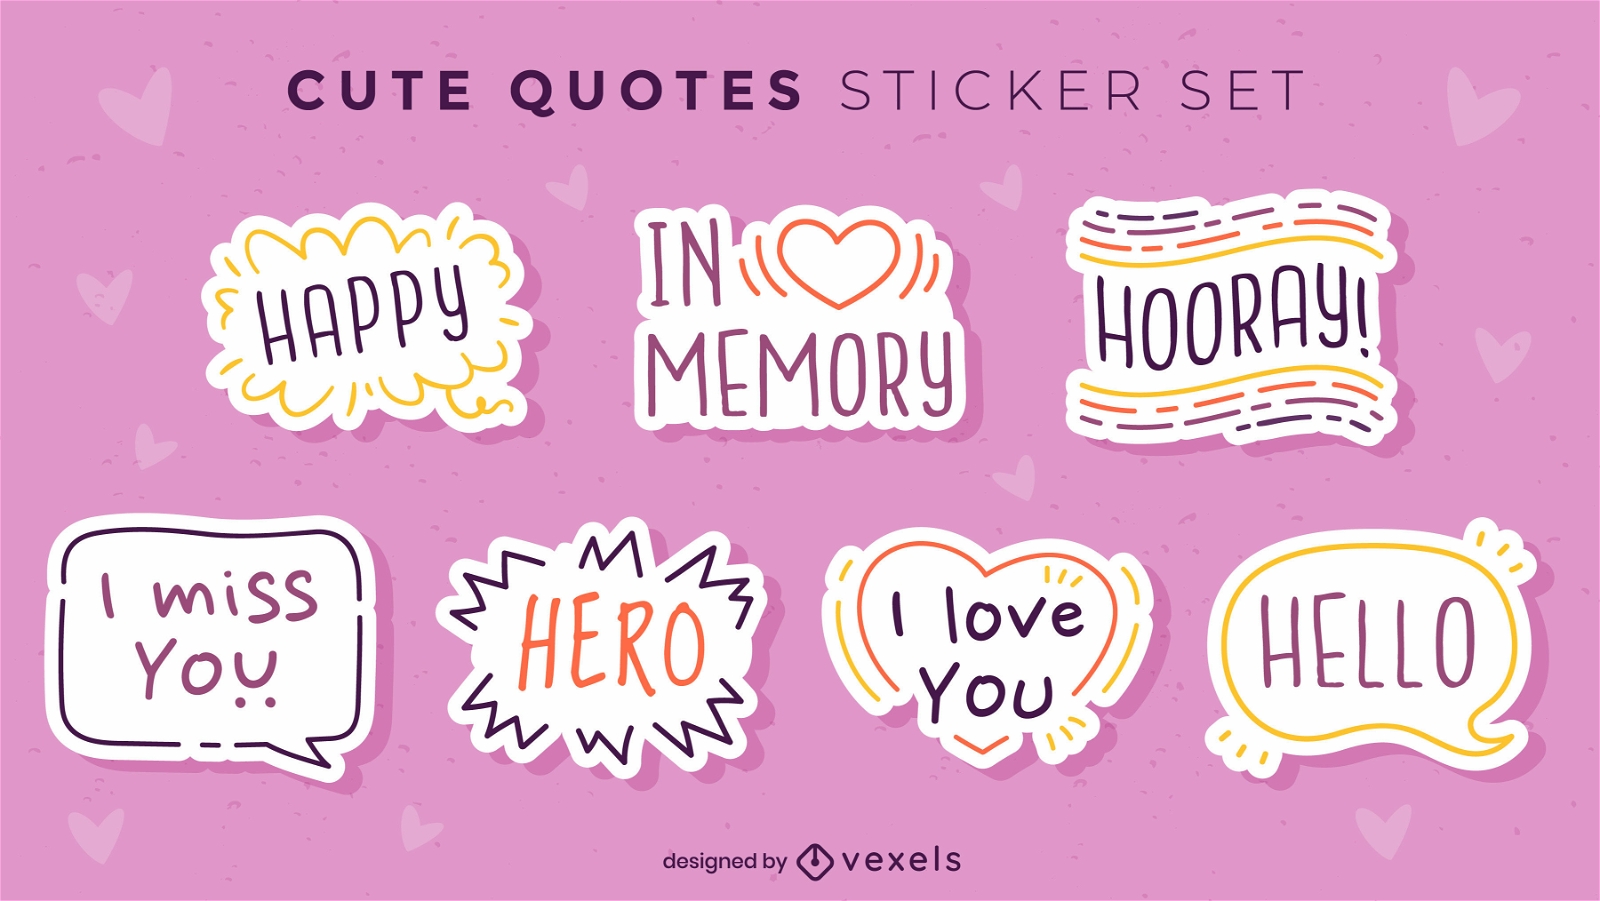 Cute and nice quotes in stickers set